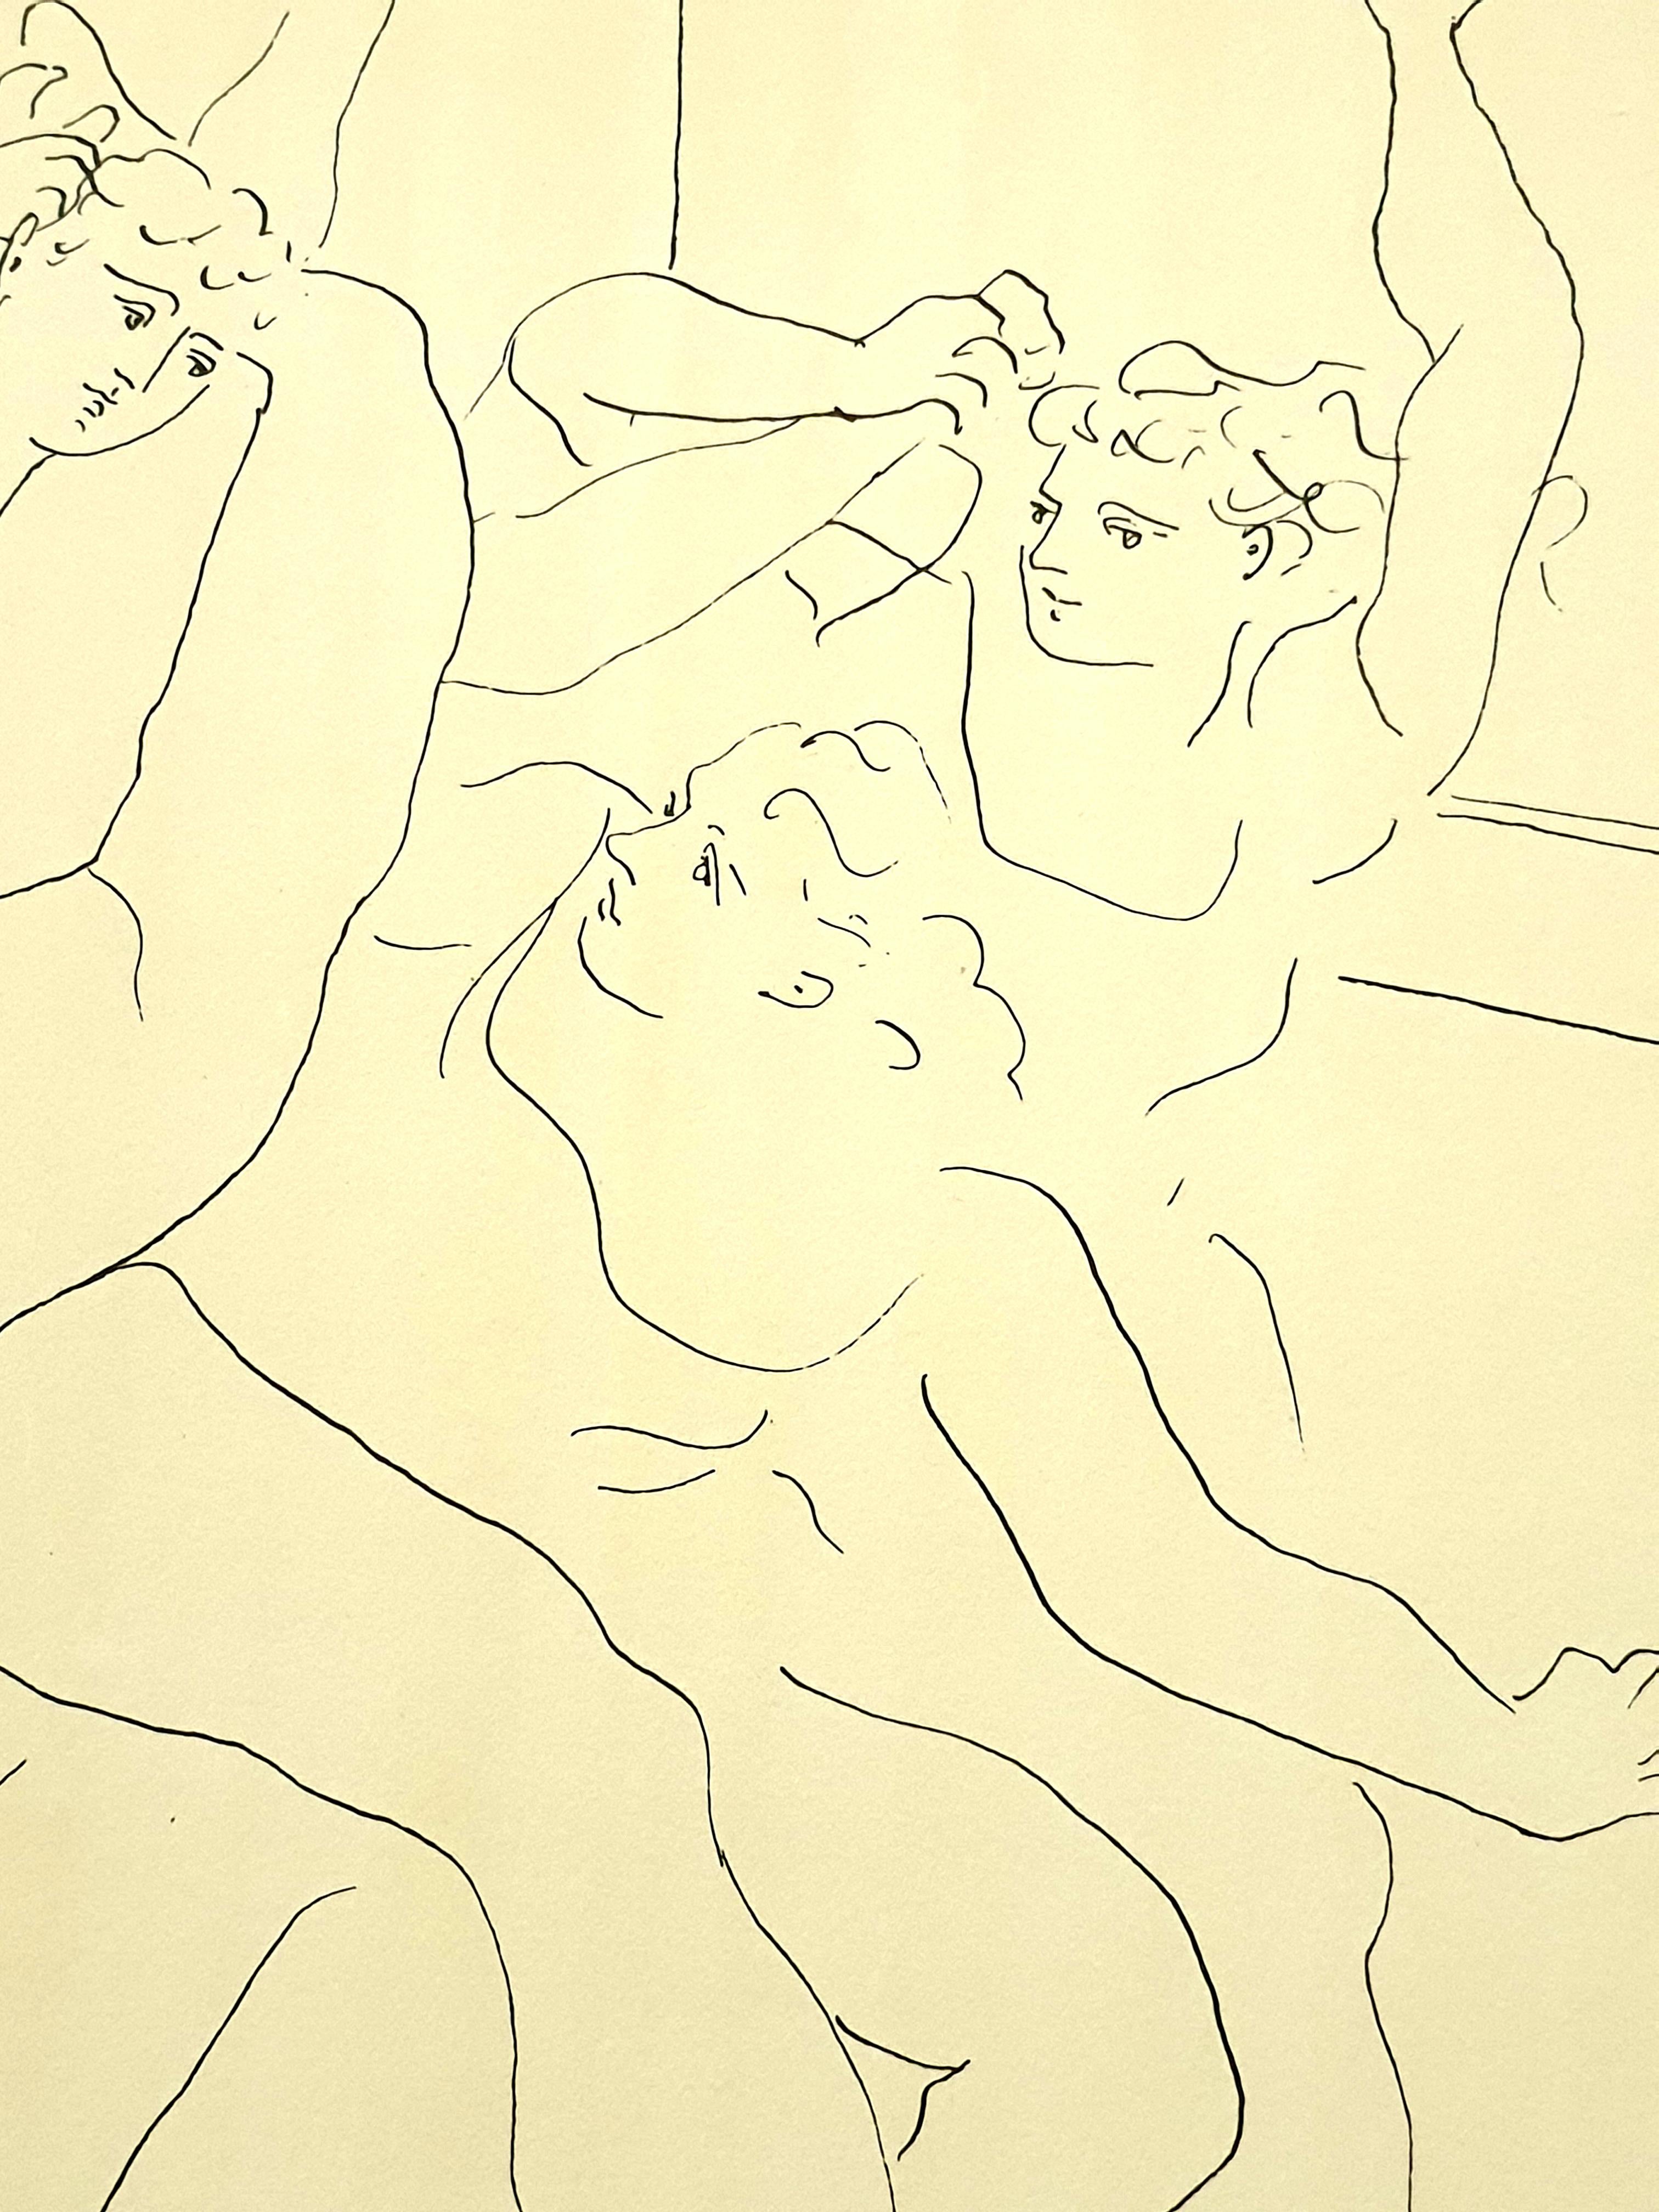 Pablo Picasso (after) - Four Ballet Dancers - Lithograph - Modern Print by (after) Pablo Picasso